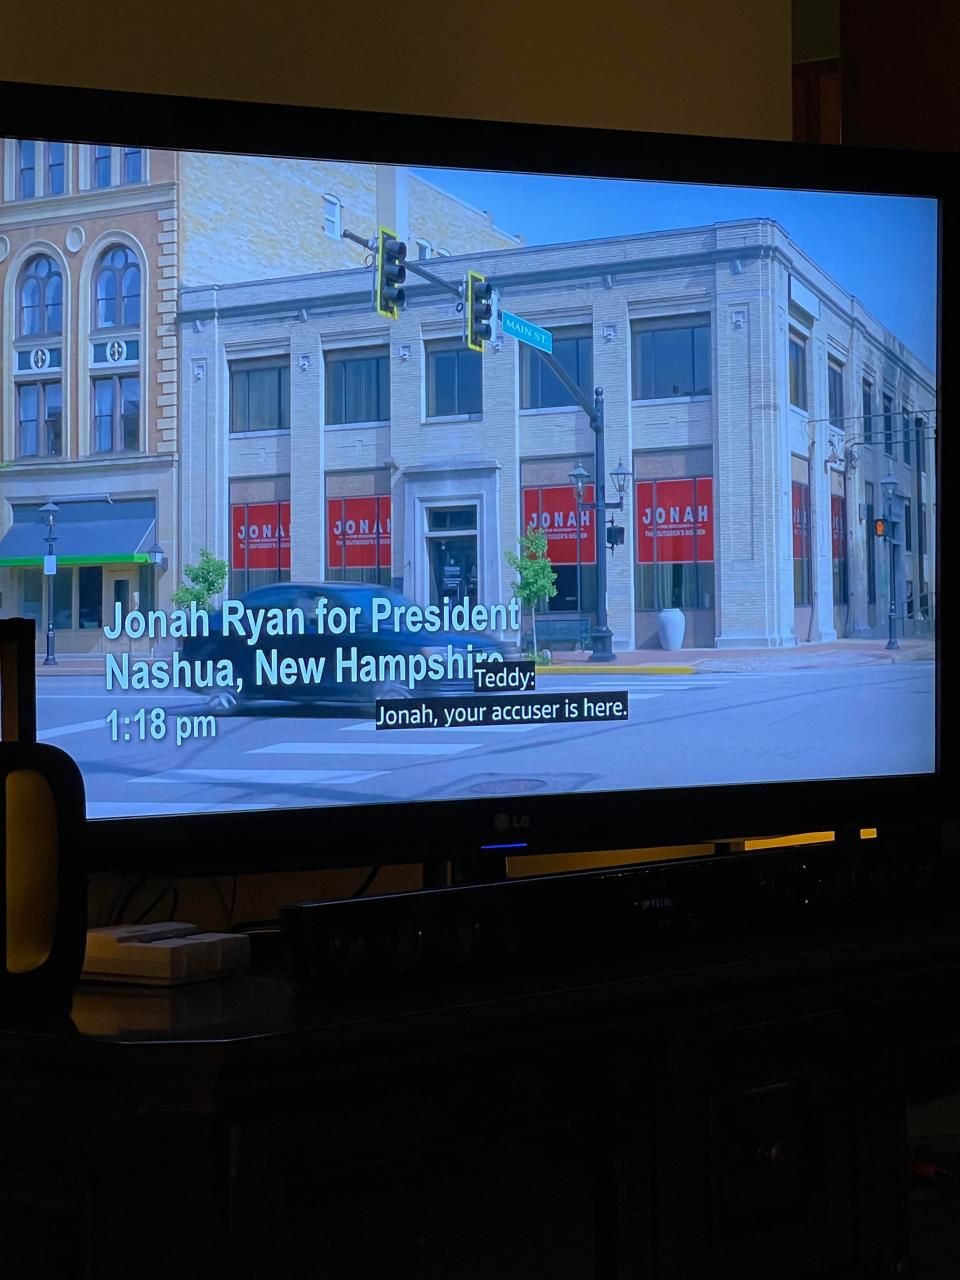 Season 7, Episode 2 of HBO's political satire "Veep" uses a shot of the Huntington Bank building in downtown Beaver to portray Nashau, N.H.